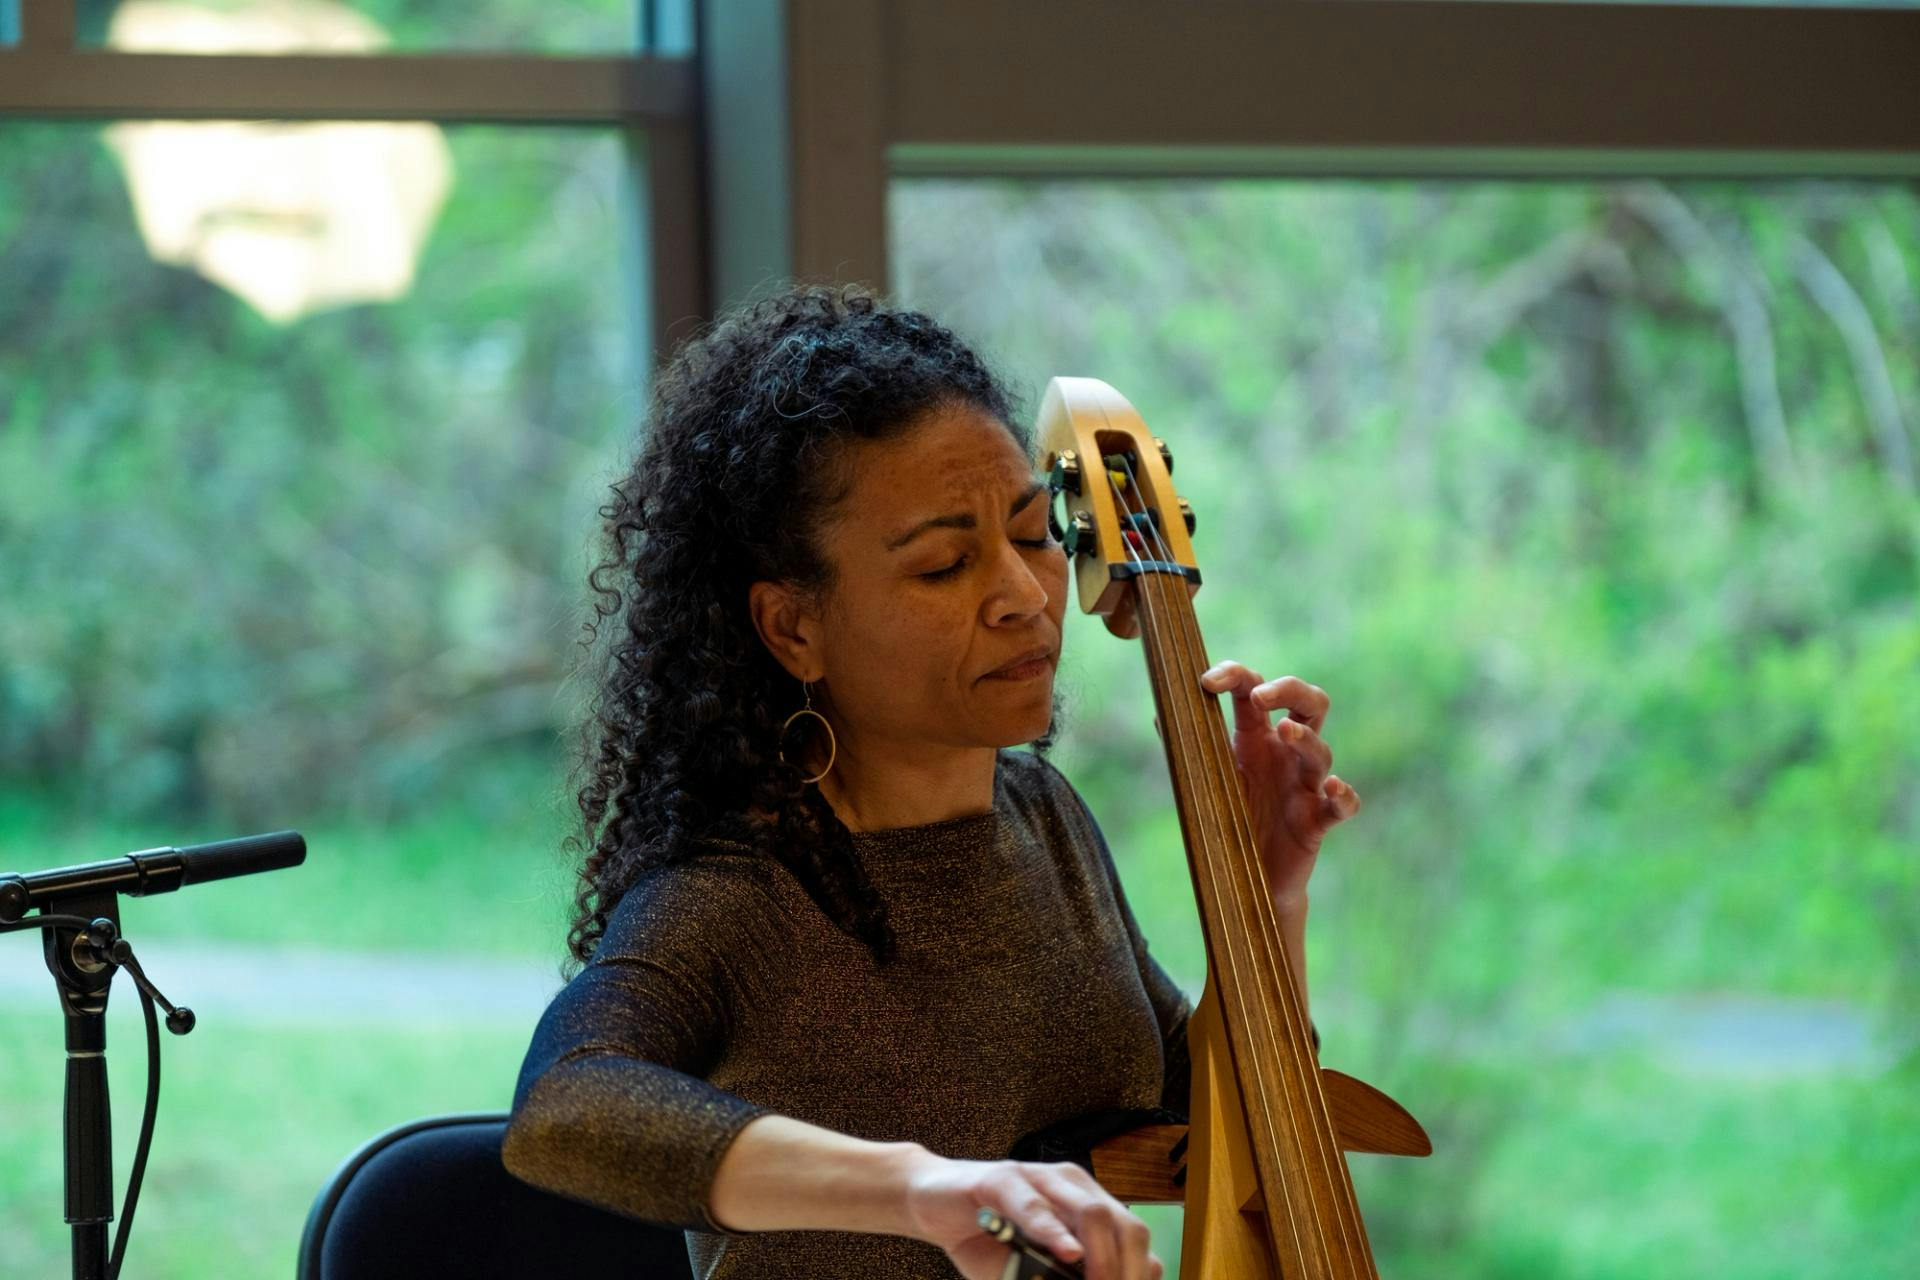 Gretchen Yanover plays her cello in front of a windows with greenery outside